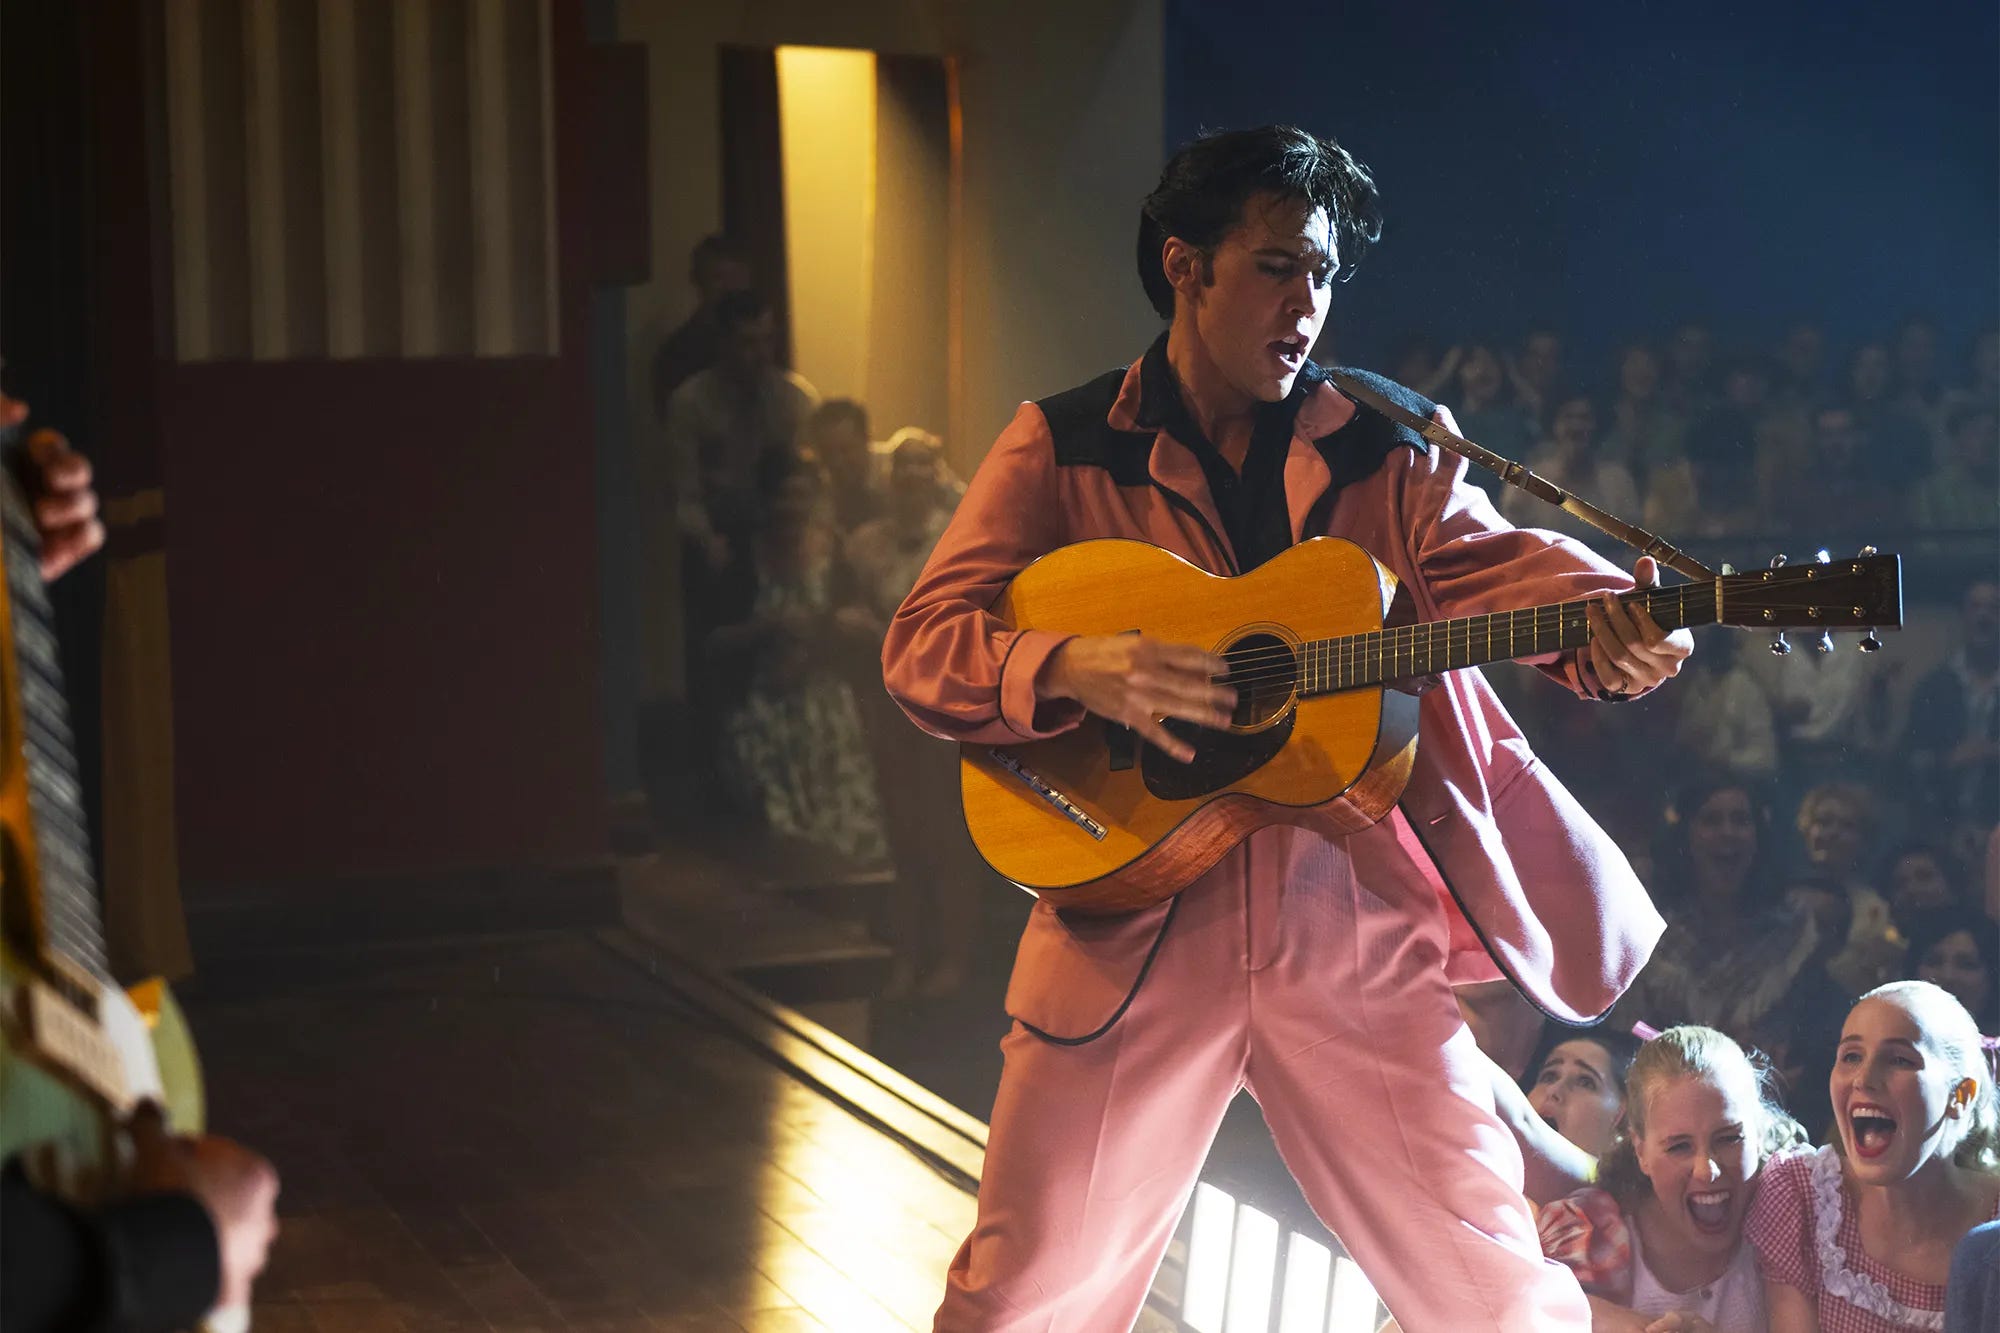 Austin Butler performs performs as Elvis Presley in a pink satin suit.